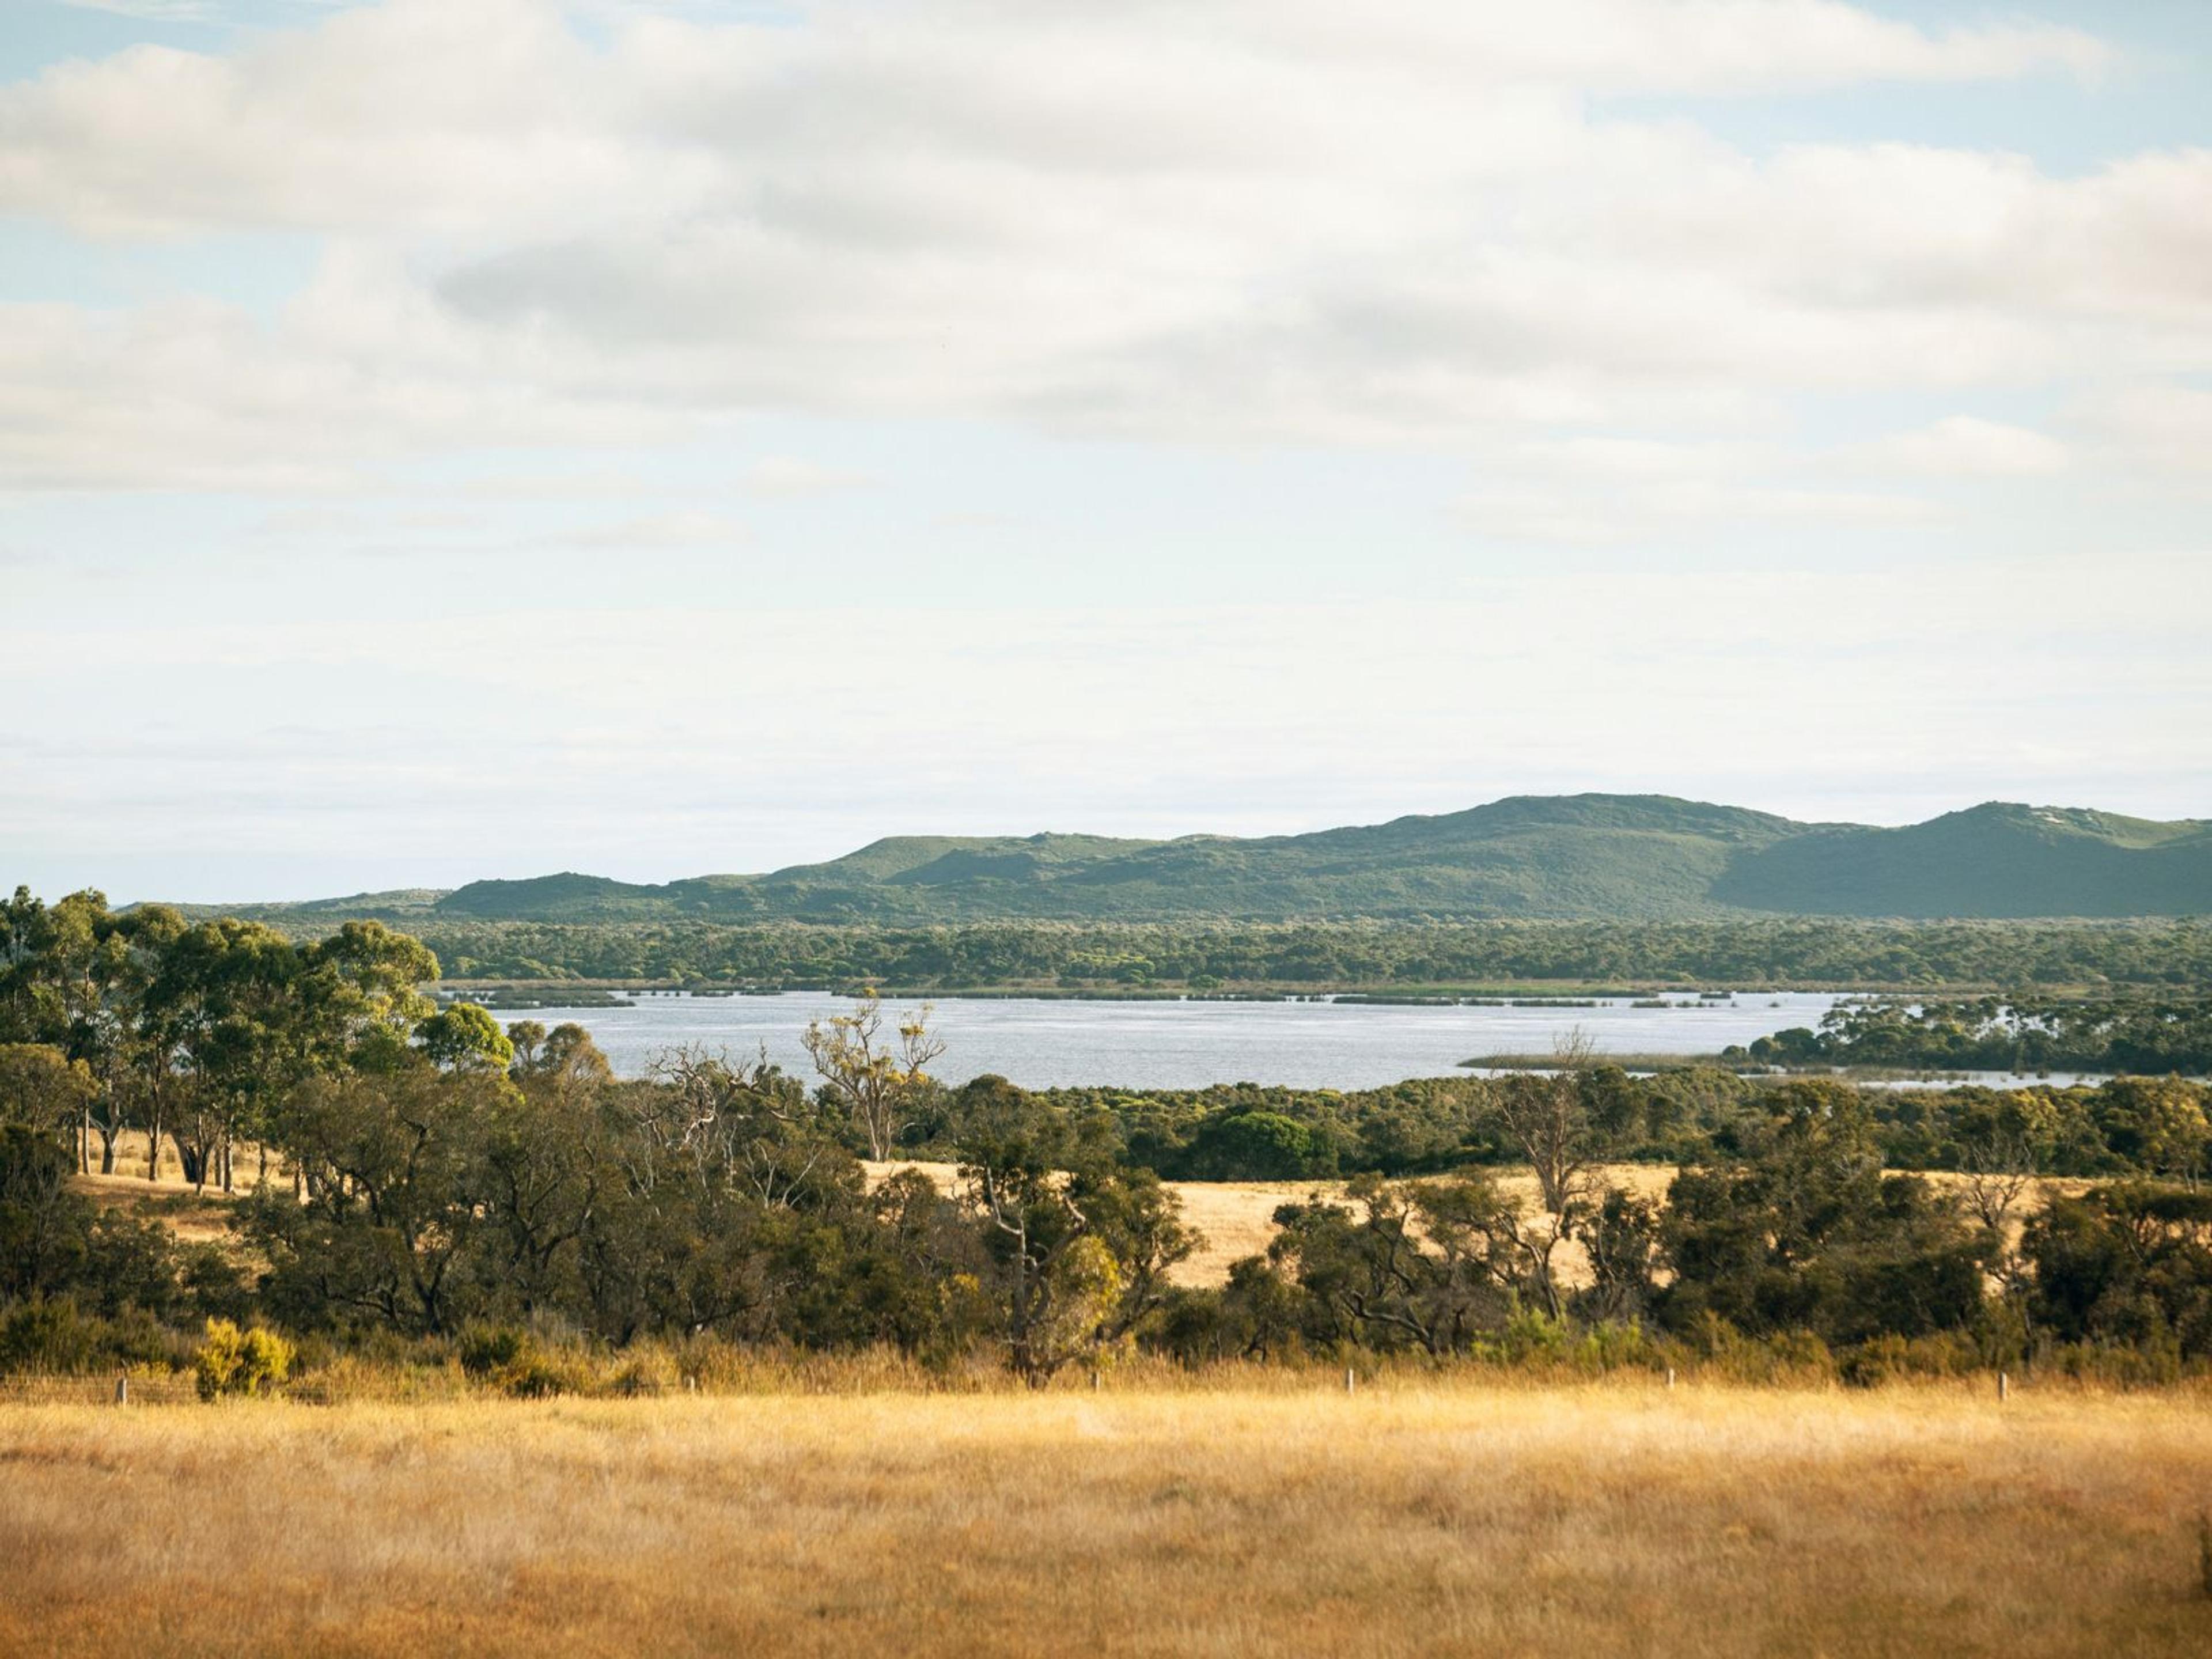 An Australian landscape. A yellowing grass area in the foreground, a body of water behind that and a hill in the background.